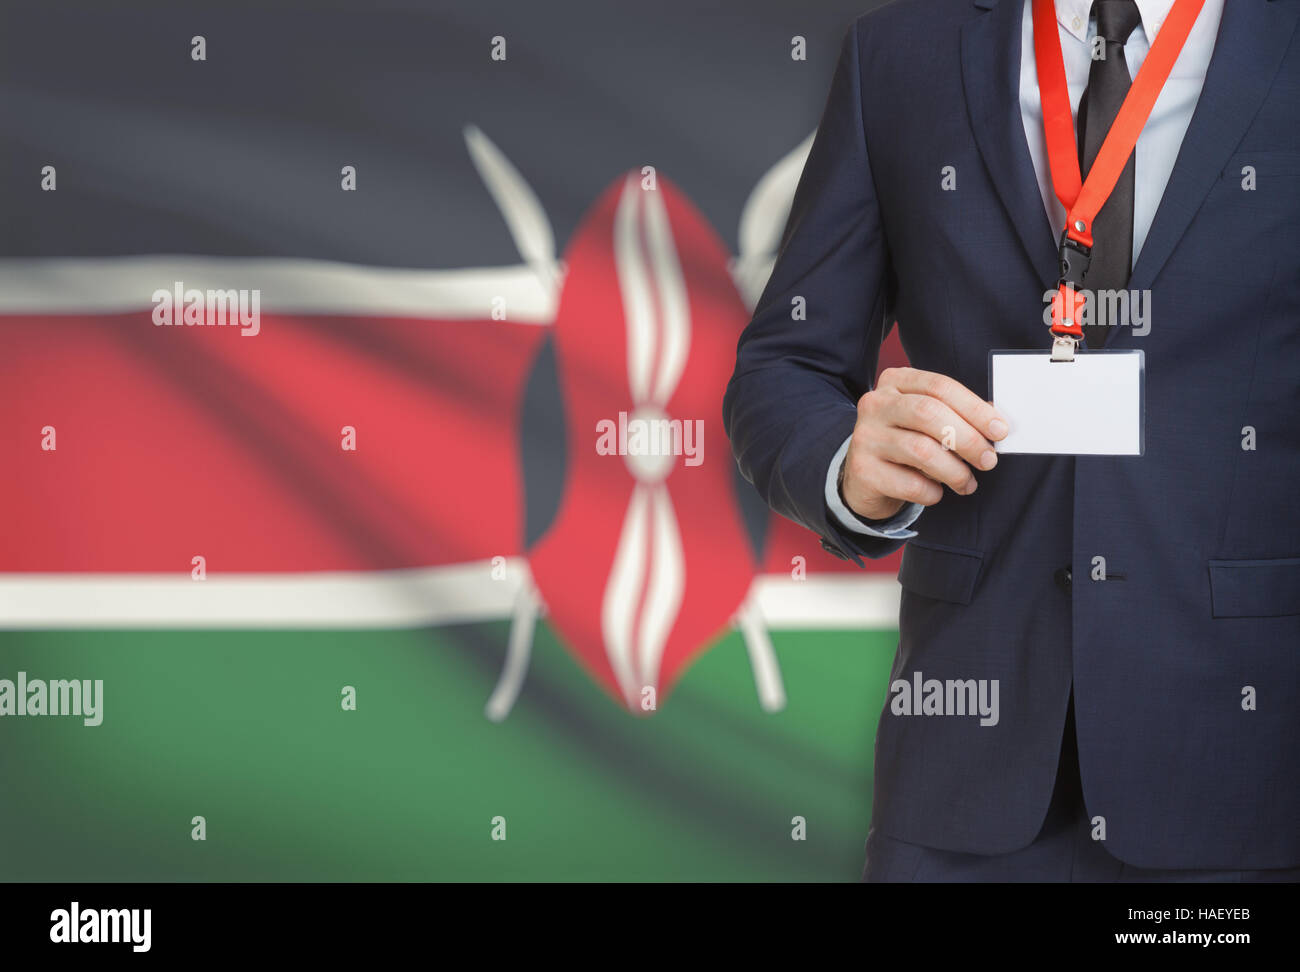 Businessman holding name card badge on a lanyard with a flag on background - Kenya Stock Photo